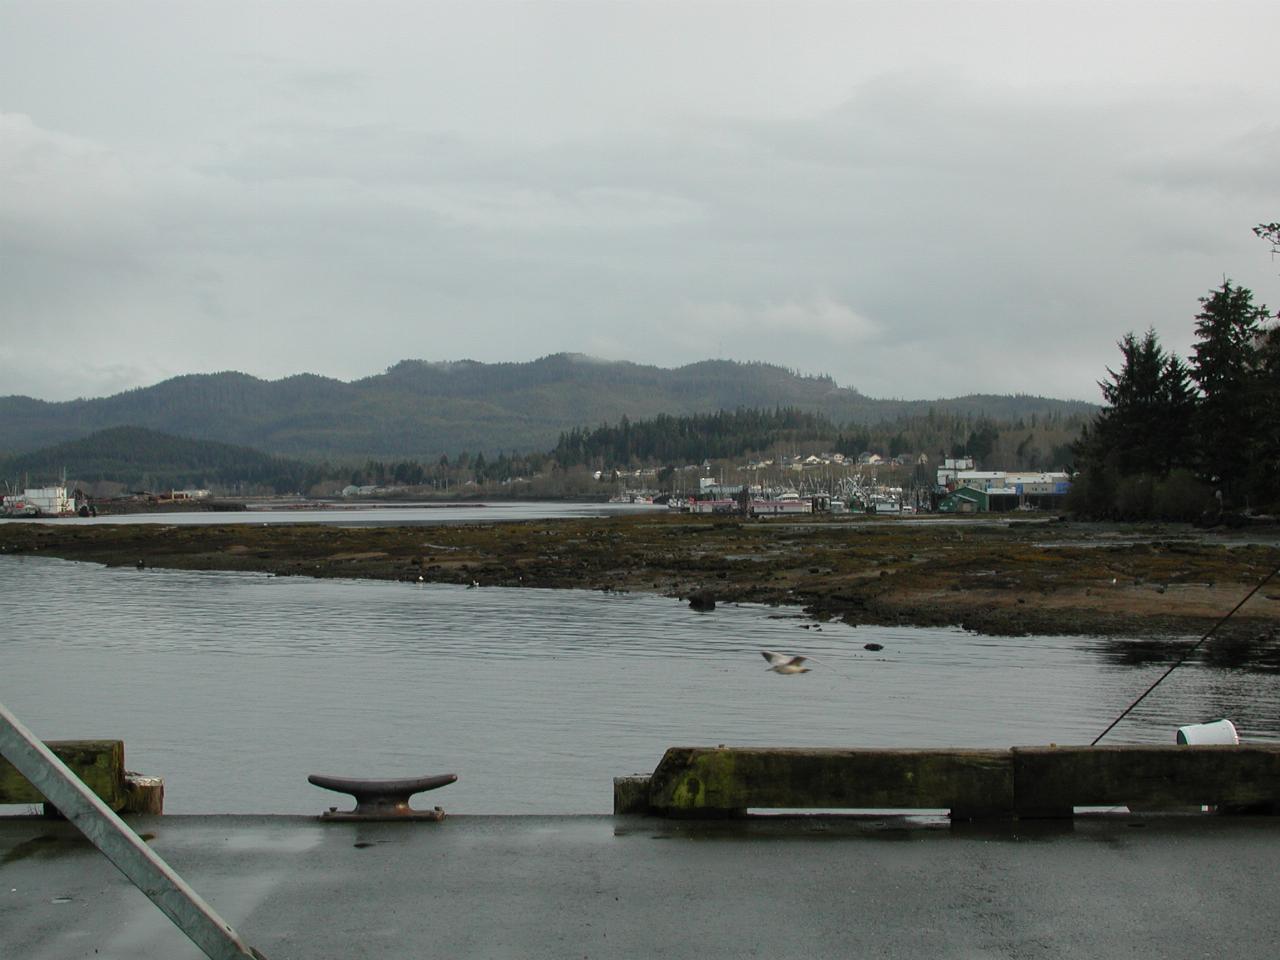 View up river from landing dock at Port Hardy, showing fuel dock too